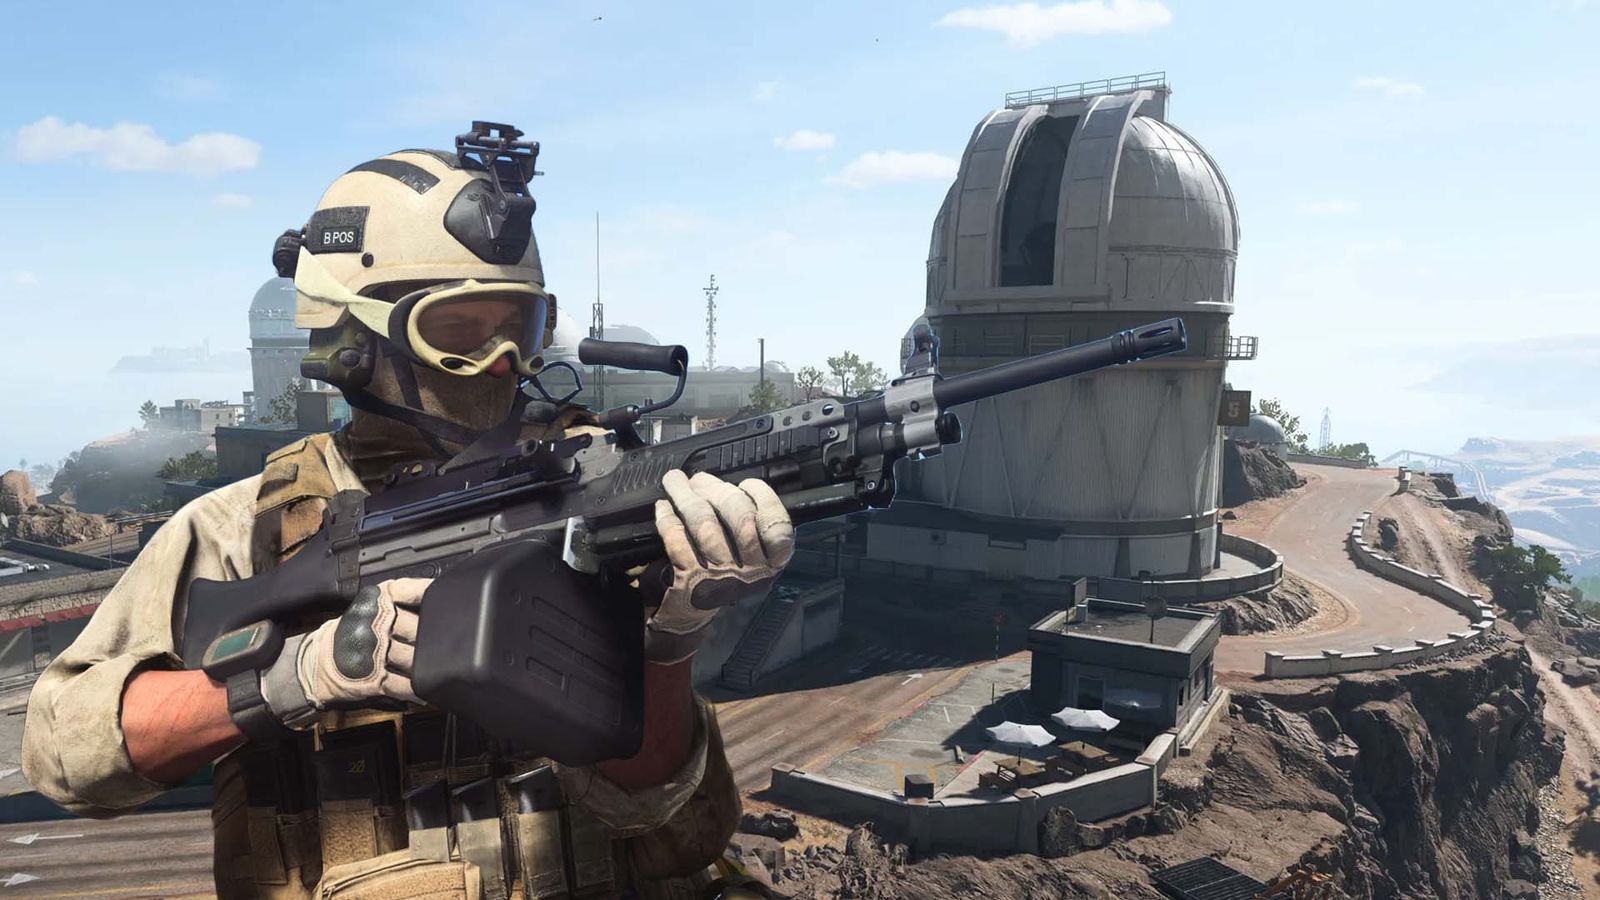 Warzone player holding Bruen MK9 LMG with Observatory tower in background